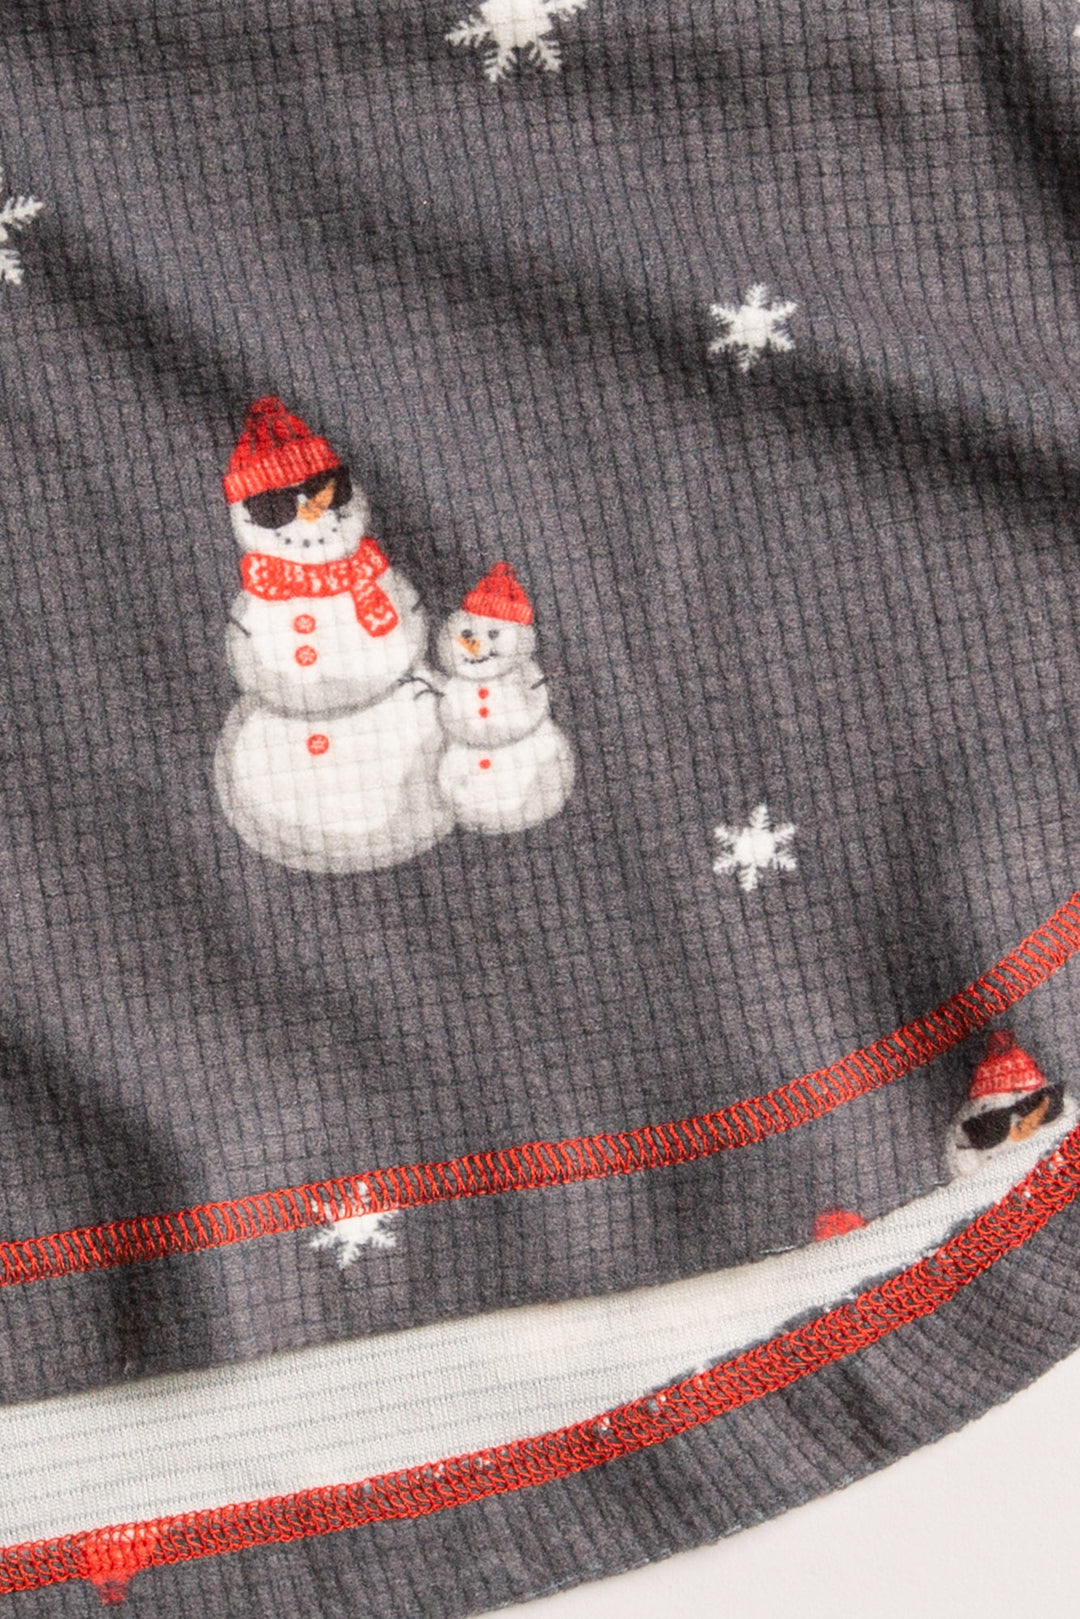 Kids' gender-neutral pj set in grey thermal velour with snowman print. Red & white striped cuffs. (7257679659108)